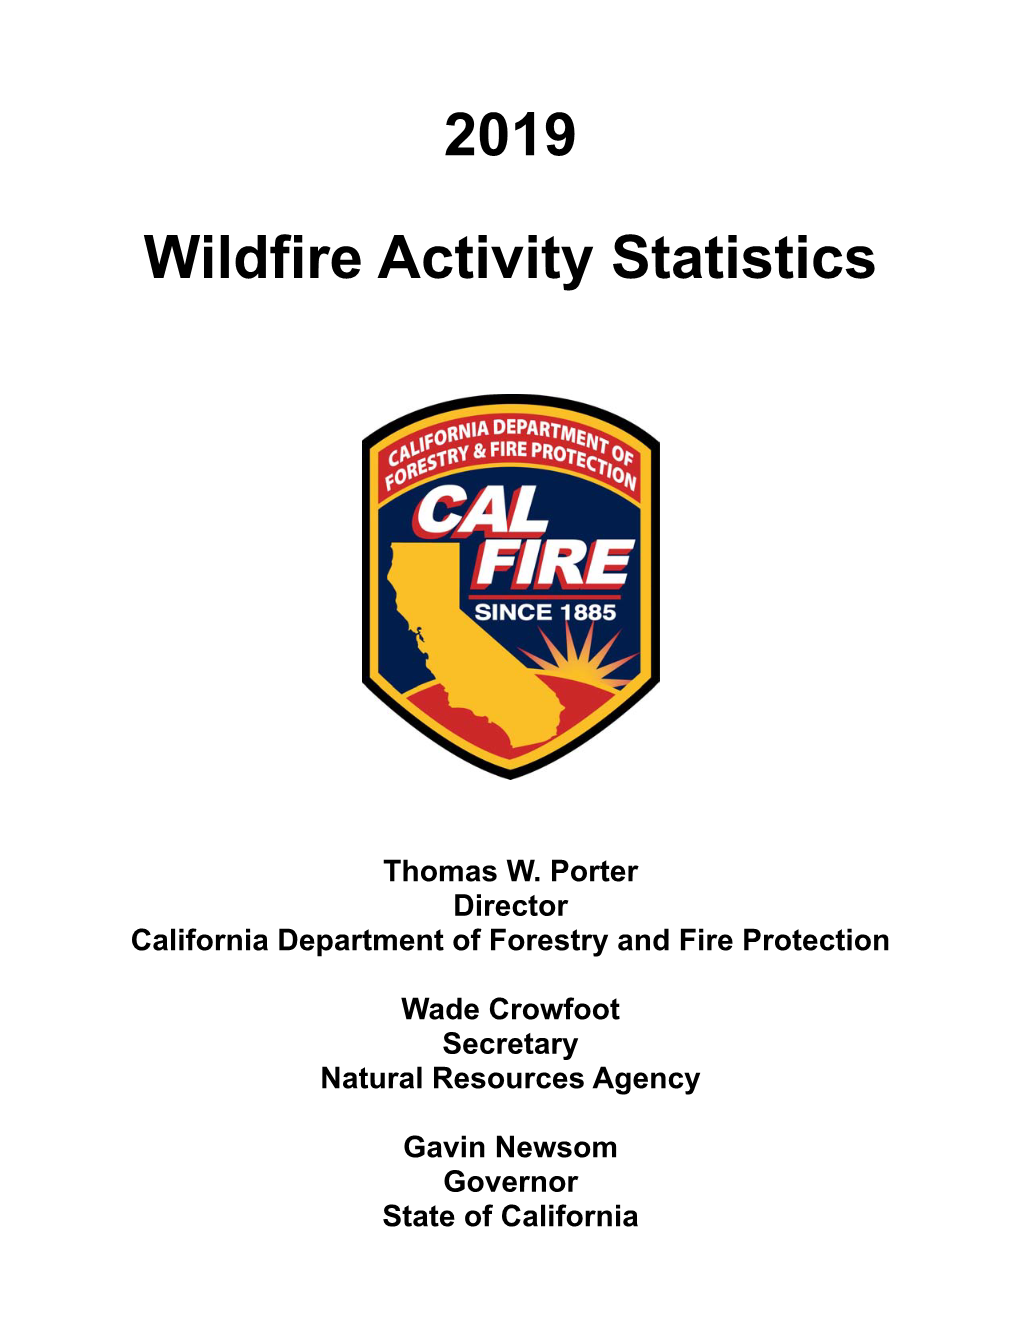 2019 Wildfire Activity Statistics California Department of Forestry and Fire Protection